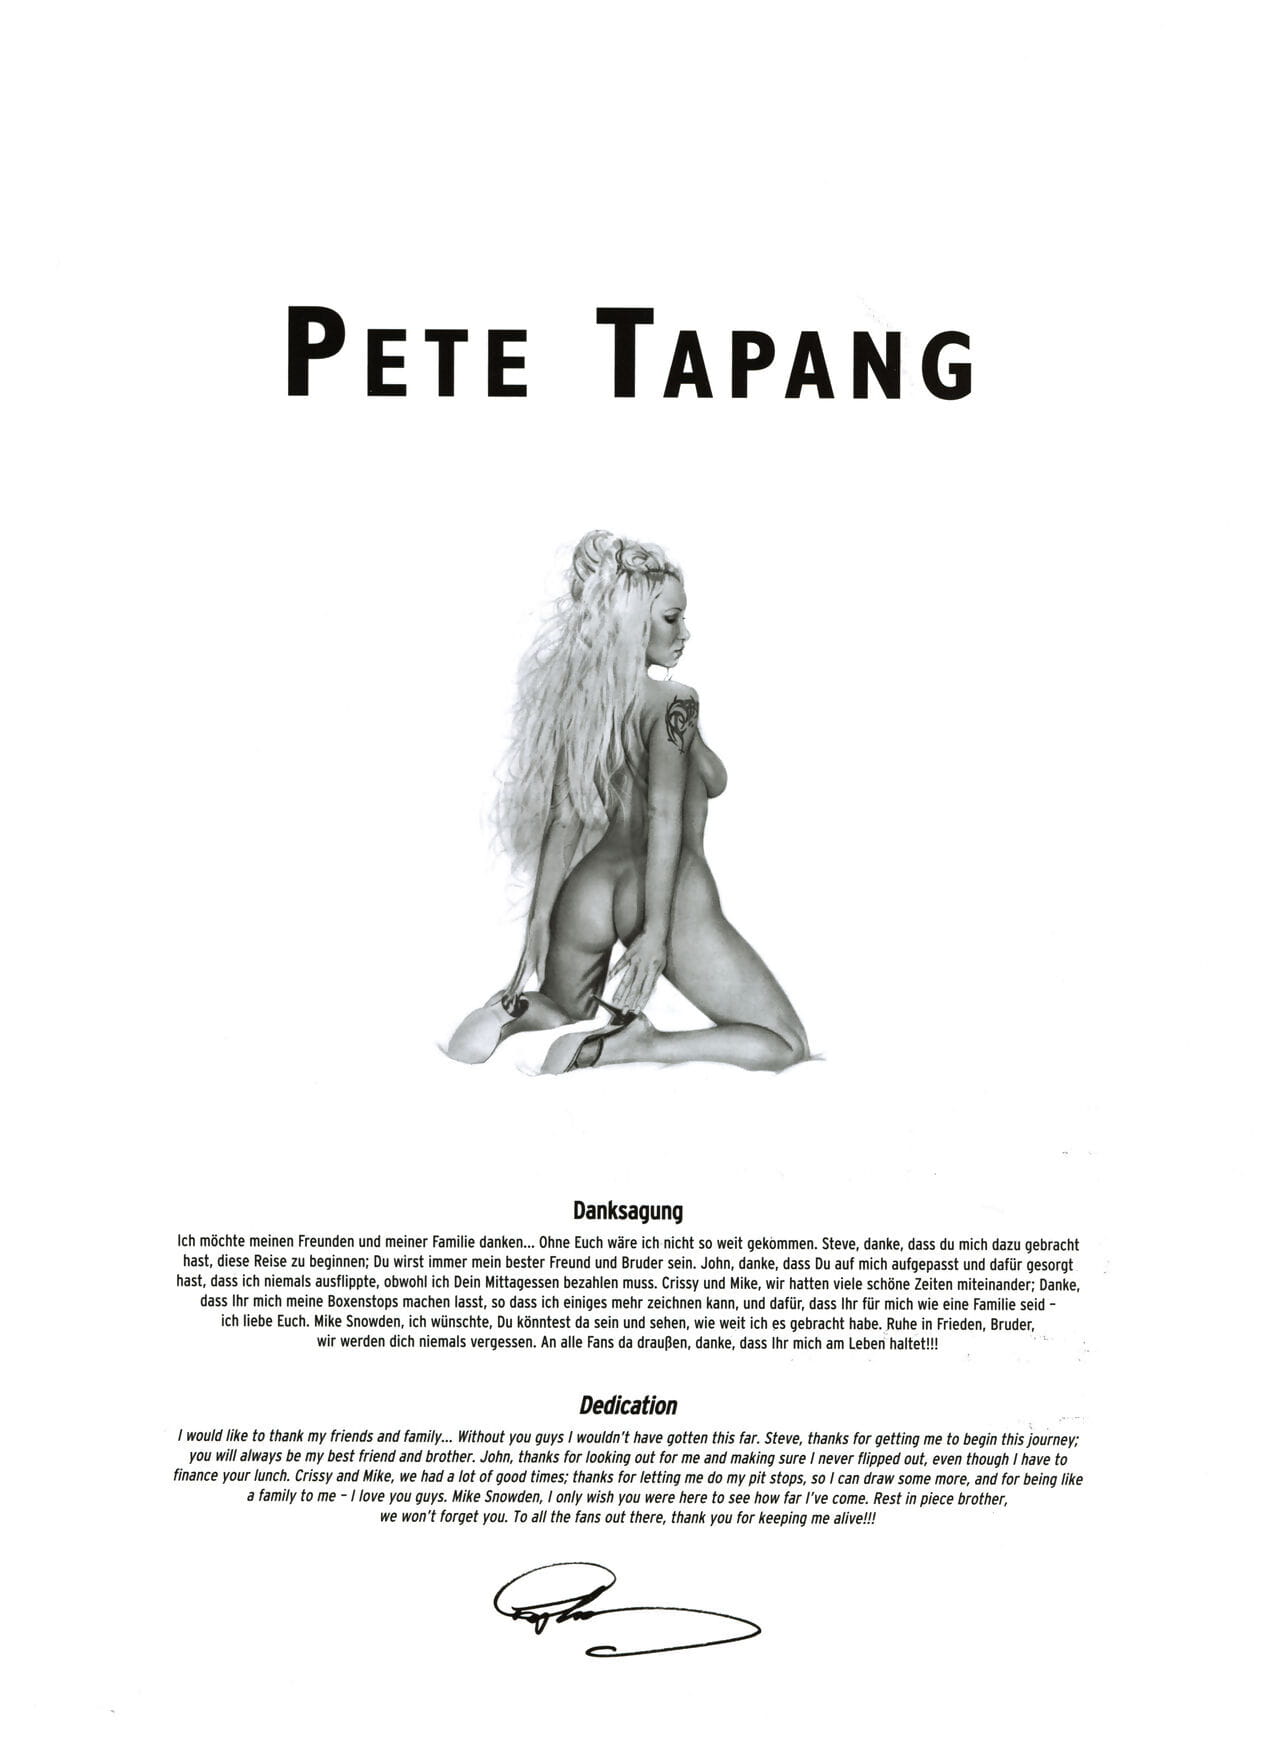 Kunst premiere #11 pete tapang page 1